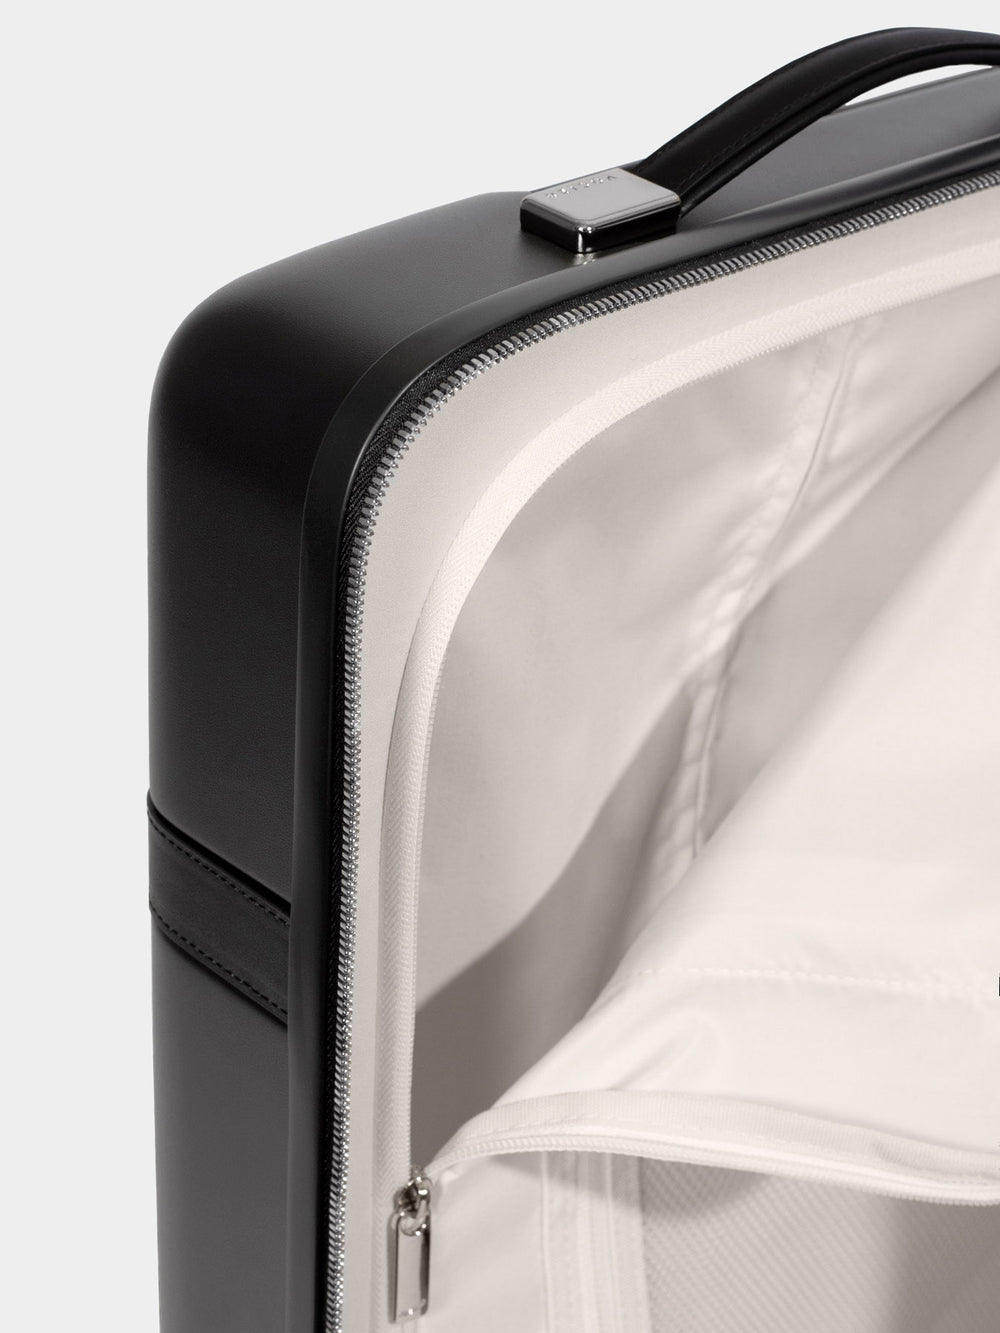 p55 carry-on luggage black zipper detail